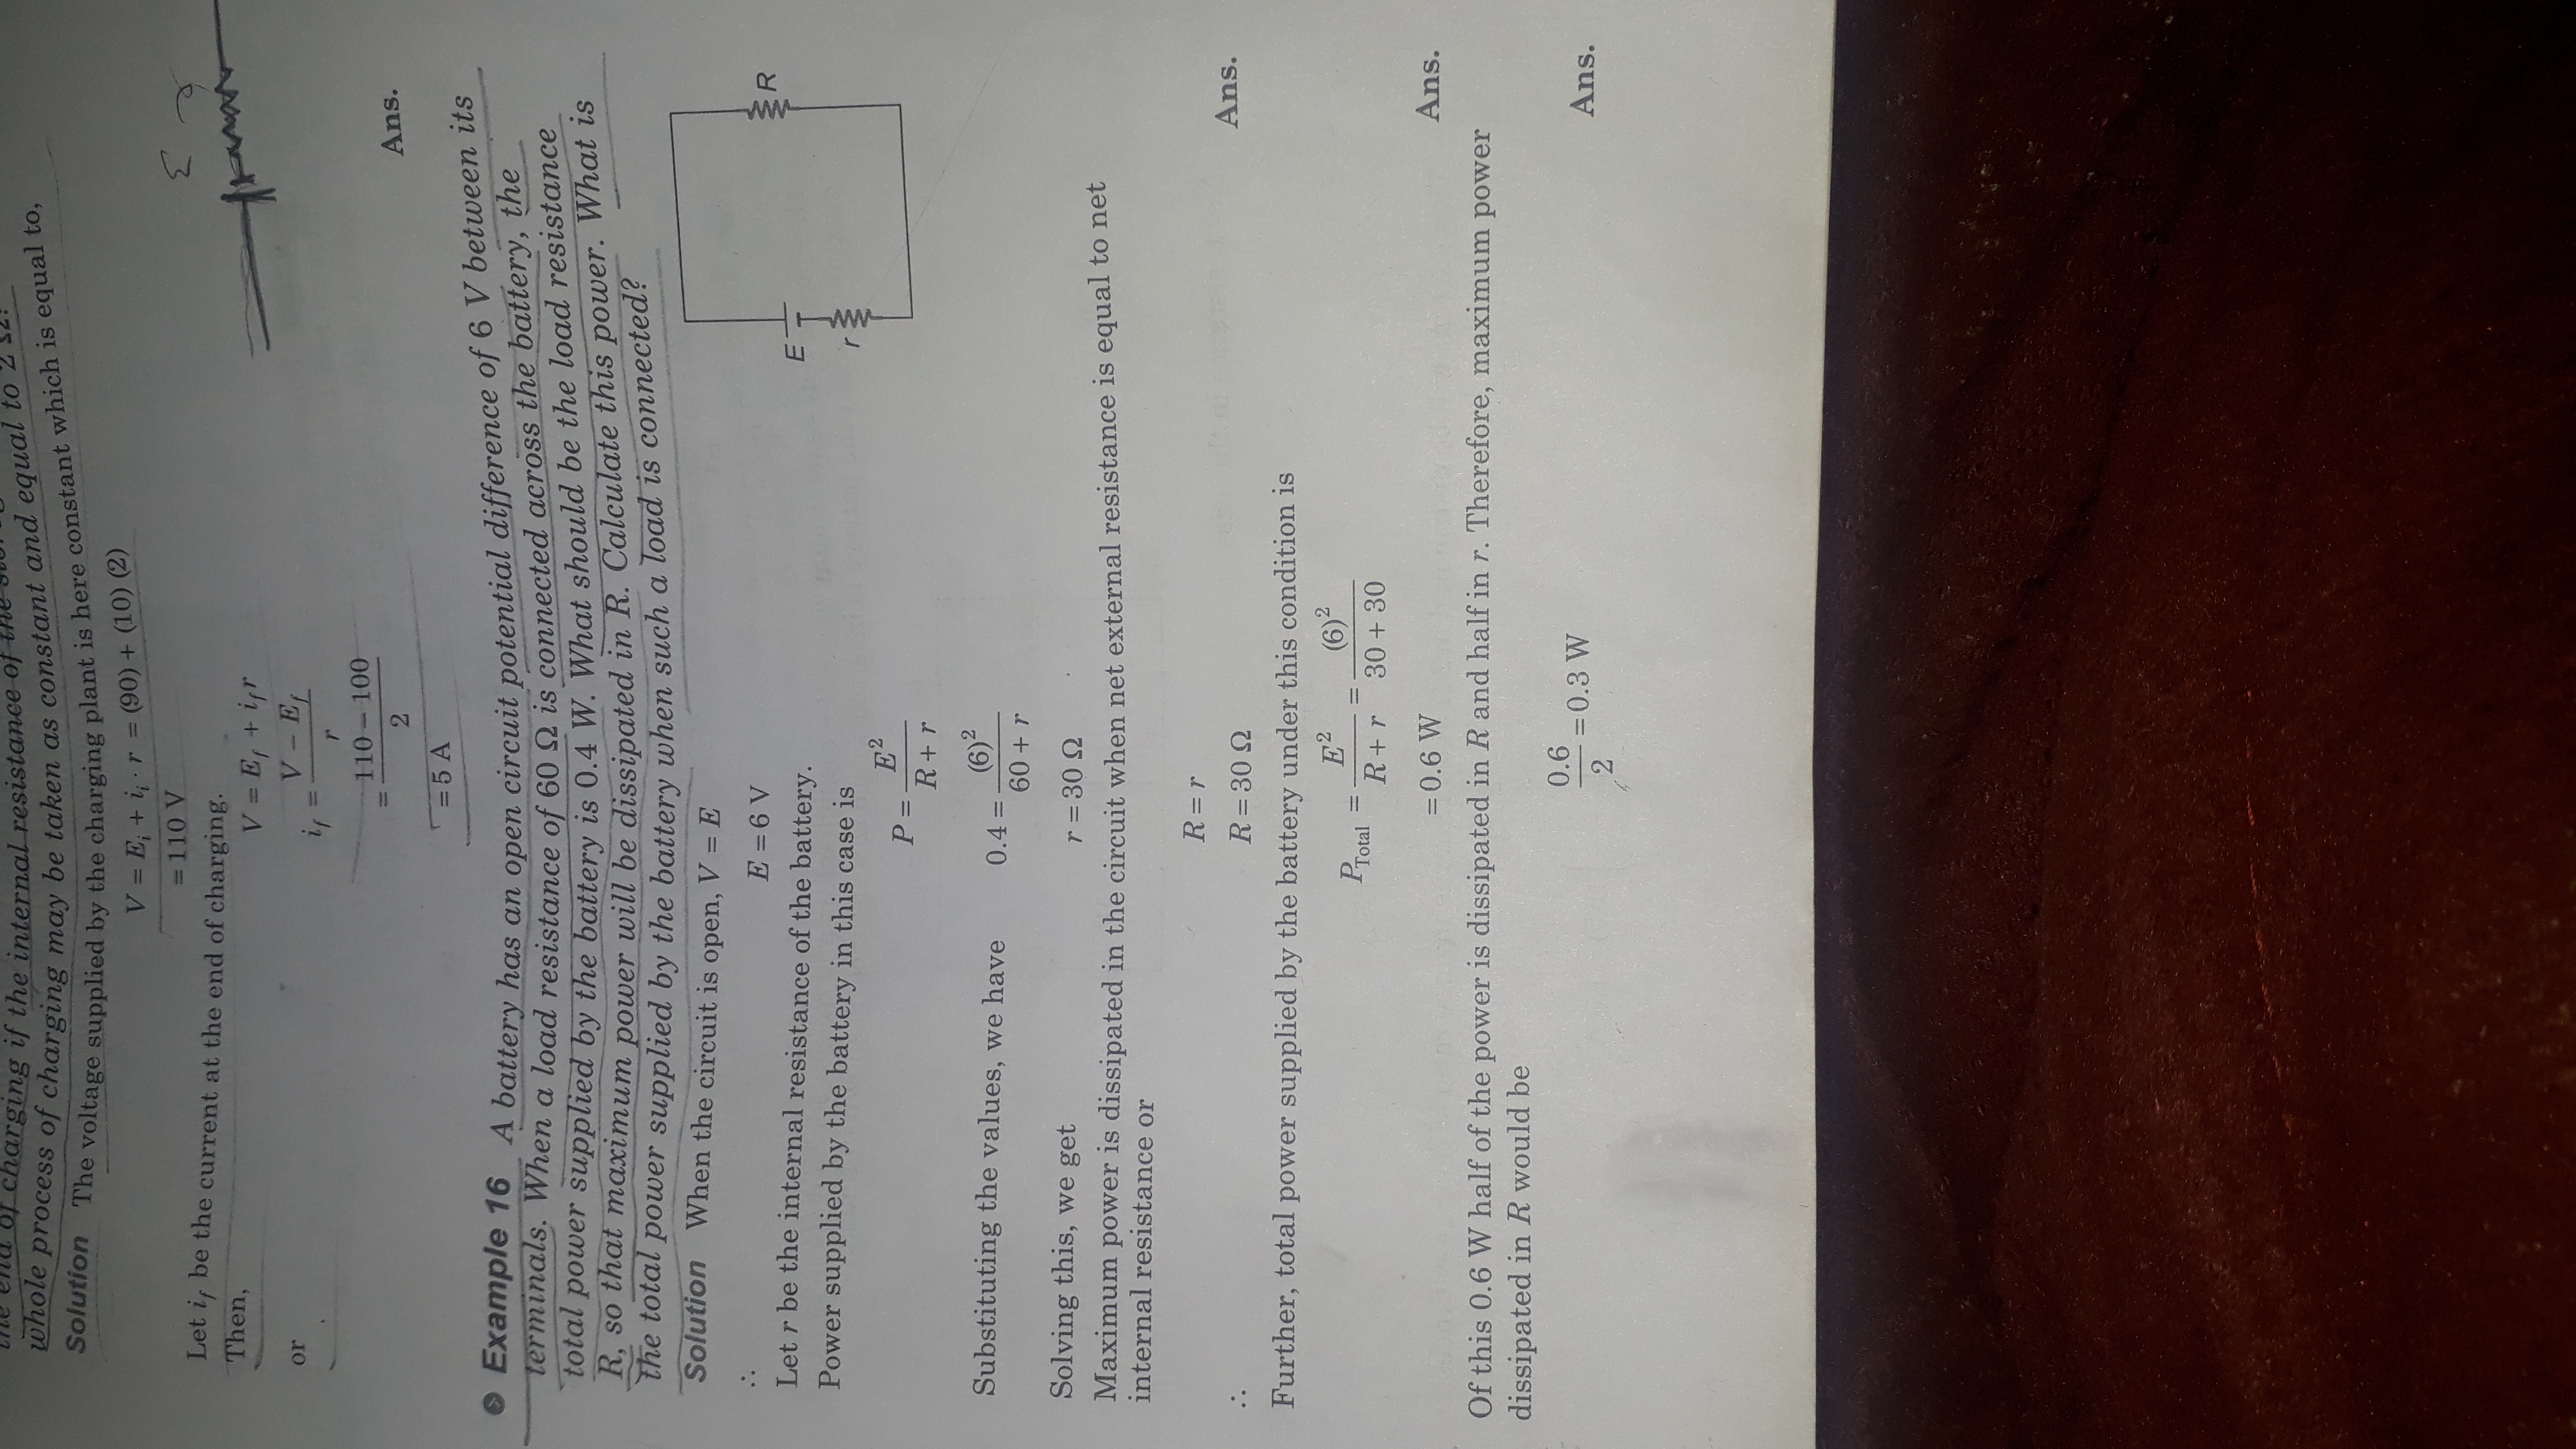 Plz Help Me In Solving This Numerical Why We Take Here P E 2 R R When Battery Is In Circuit And Current Flows Through It Wont P D ome V E Ir Why We Only Take E As P D Across Battery